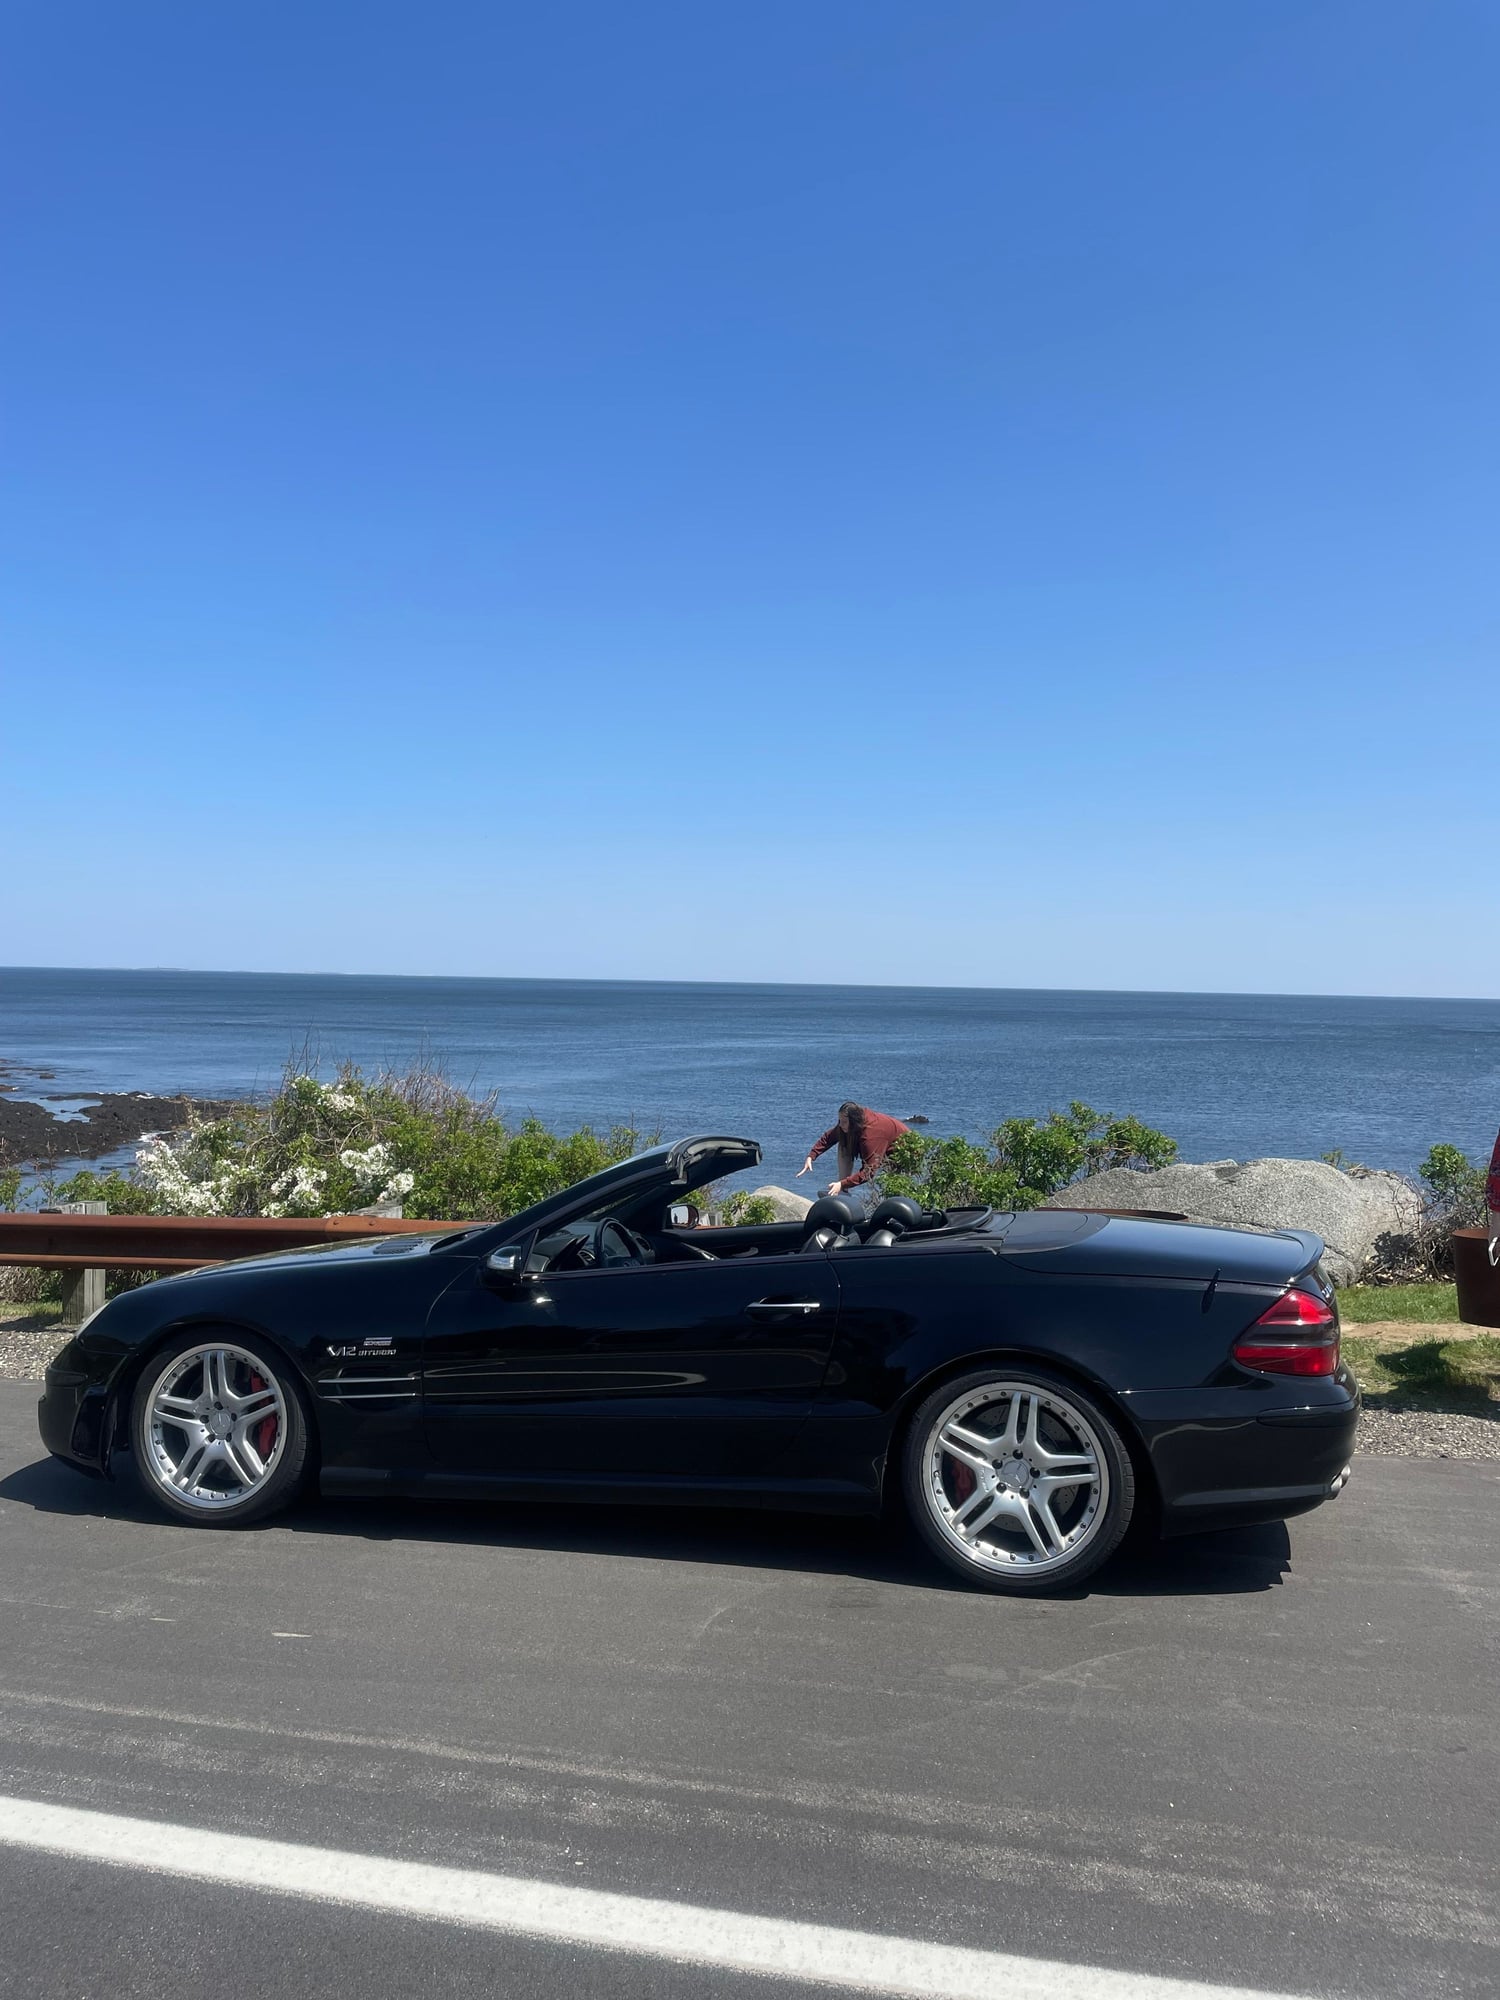 2005 Mercedes-Benz SL65 AMG - 2005 SL65 AMG - Used - VIN WDBSK79f95f095678 - 113,000 Miles - 12 cyl - 2WD - Automatic - Convertible - Black - Portsmouth, Nh, NH 03870, United States